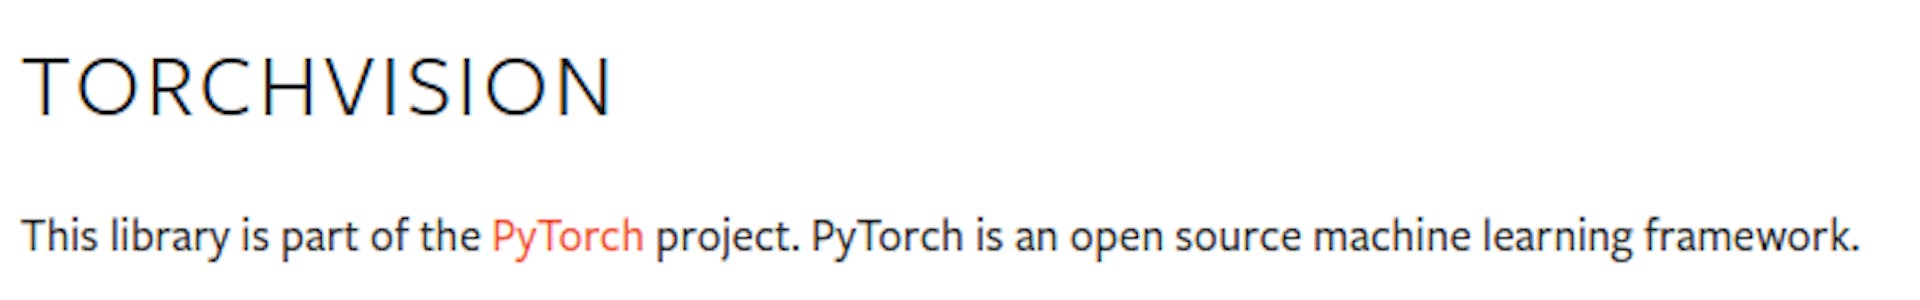 https://pytorch.org/vision/stable/index.html